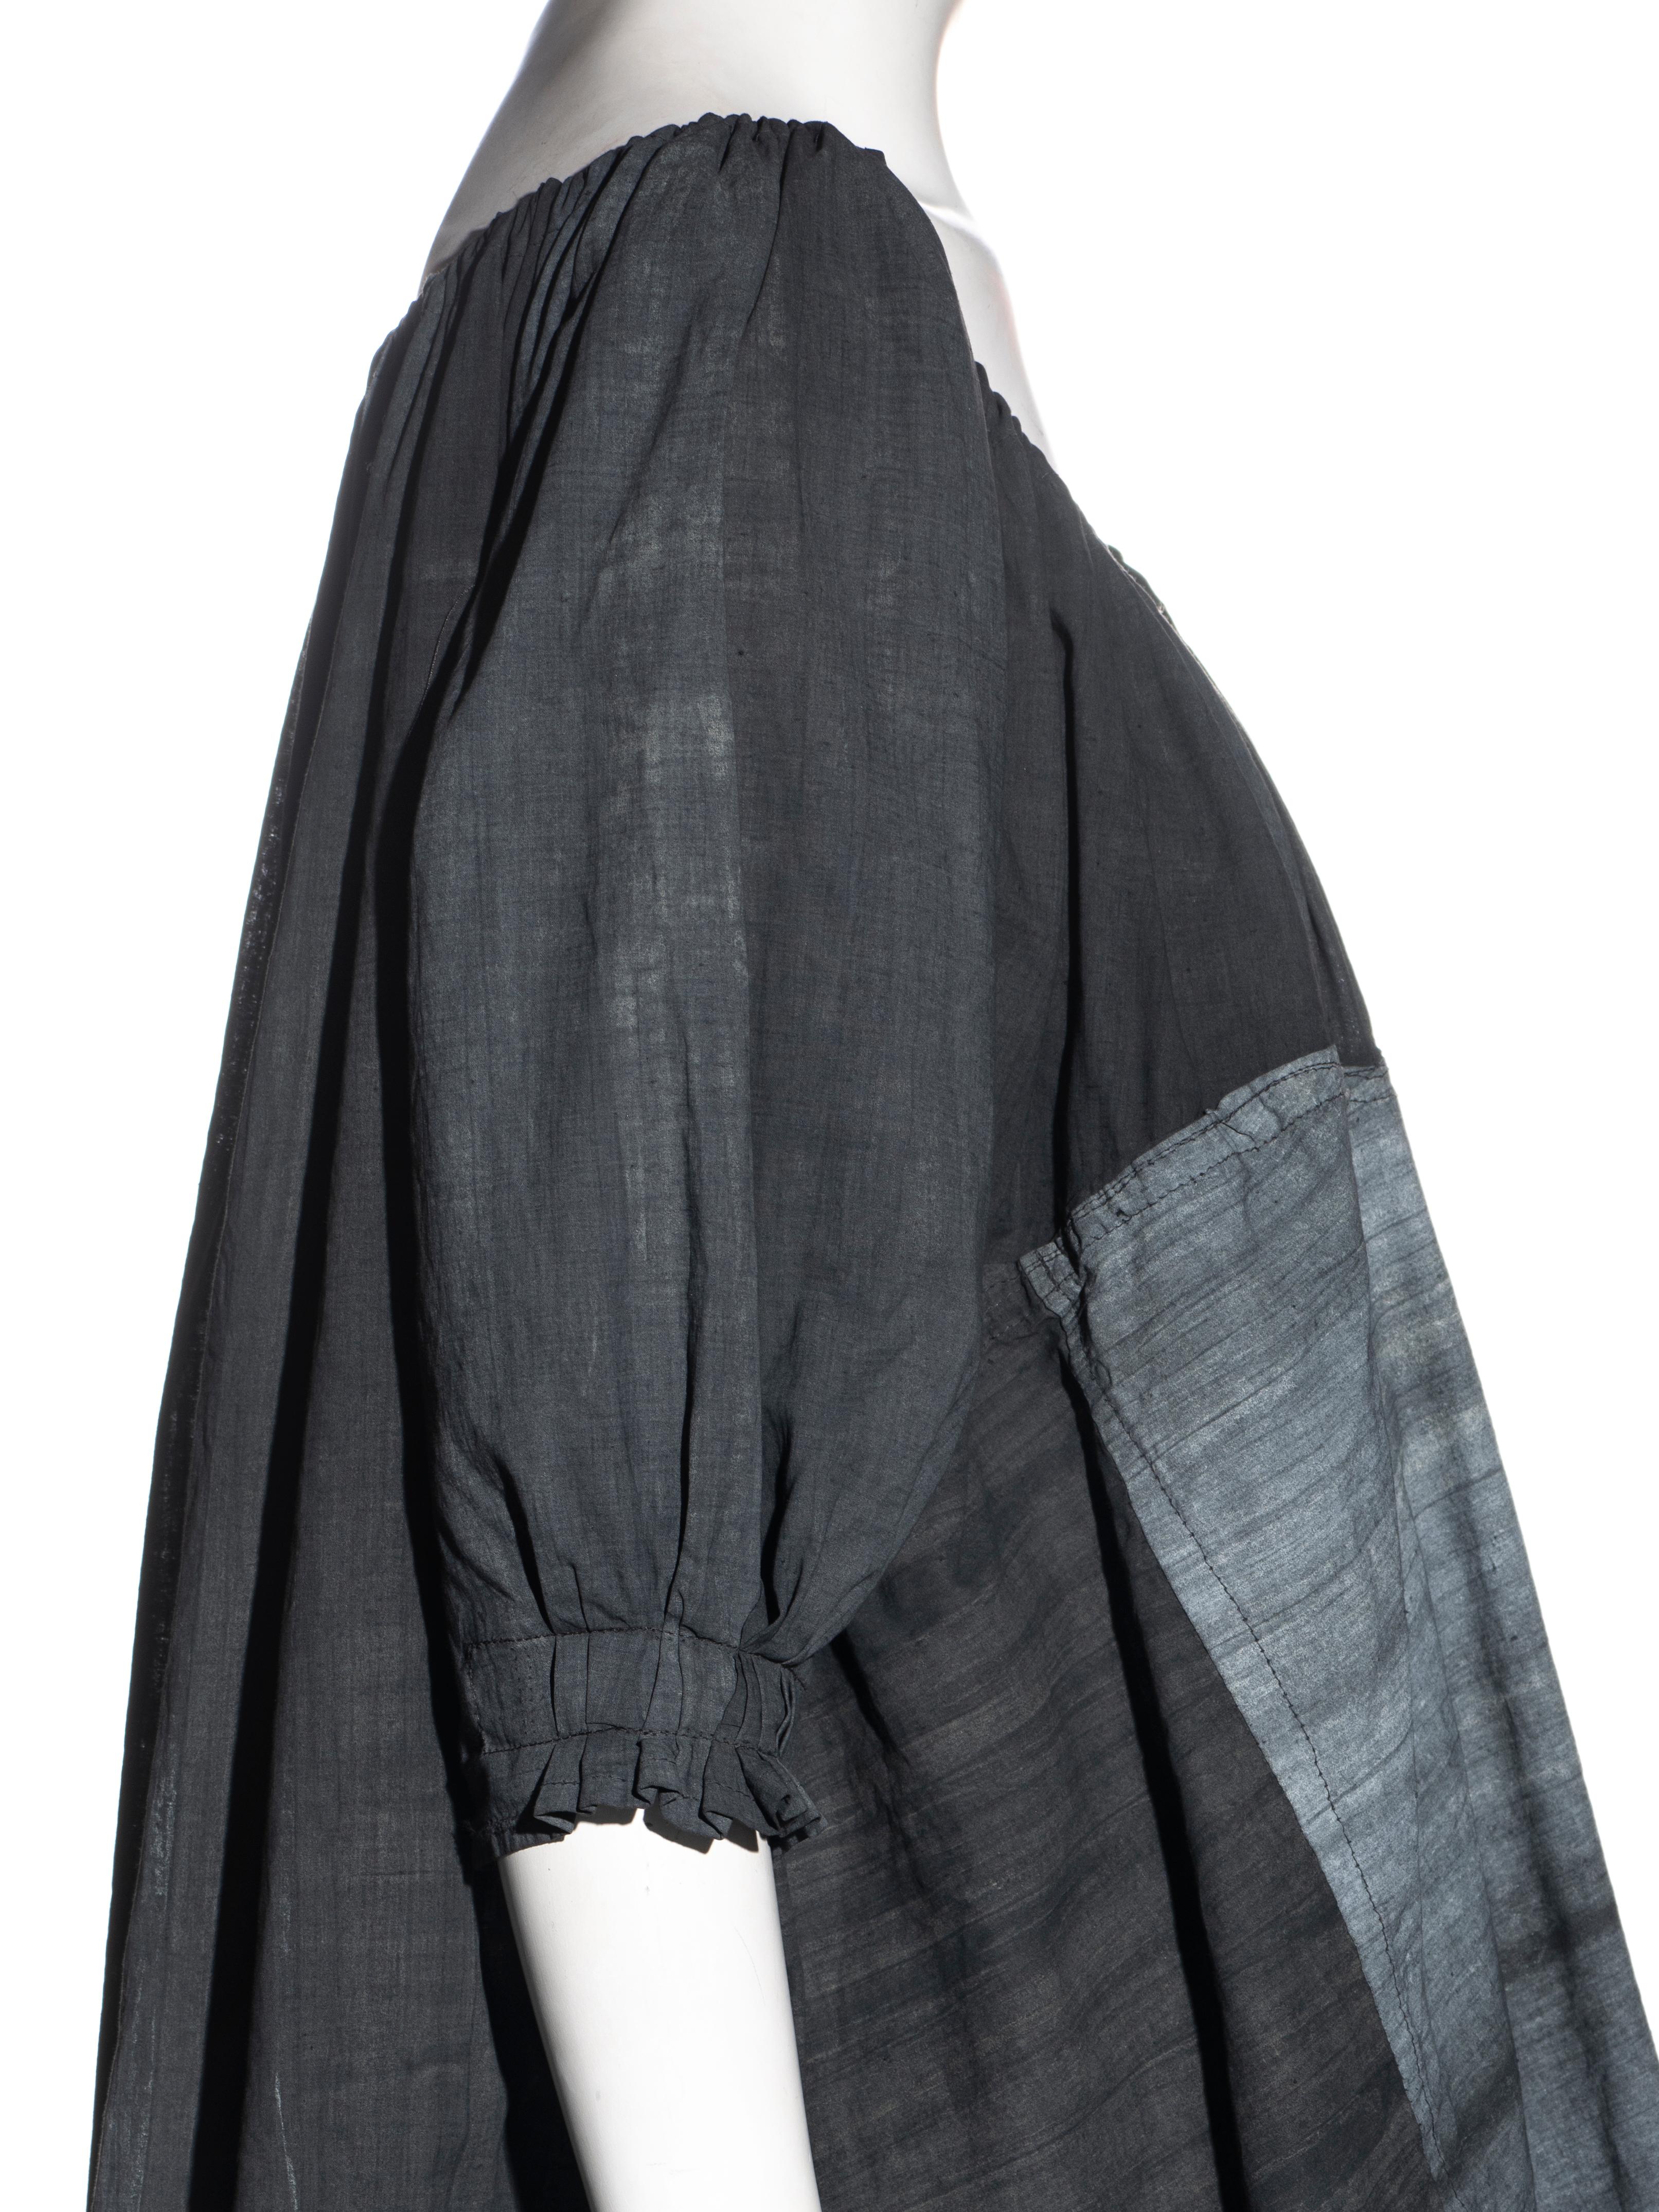 Worlds End by Vivienne Westwood and Malcolm McLaren grey smock dress, ss 1983 For Sale 1